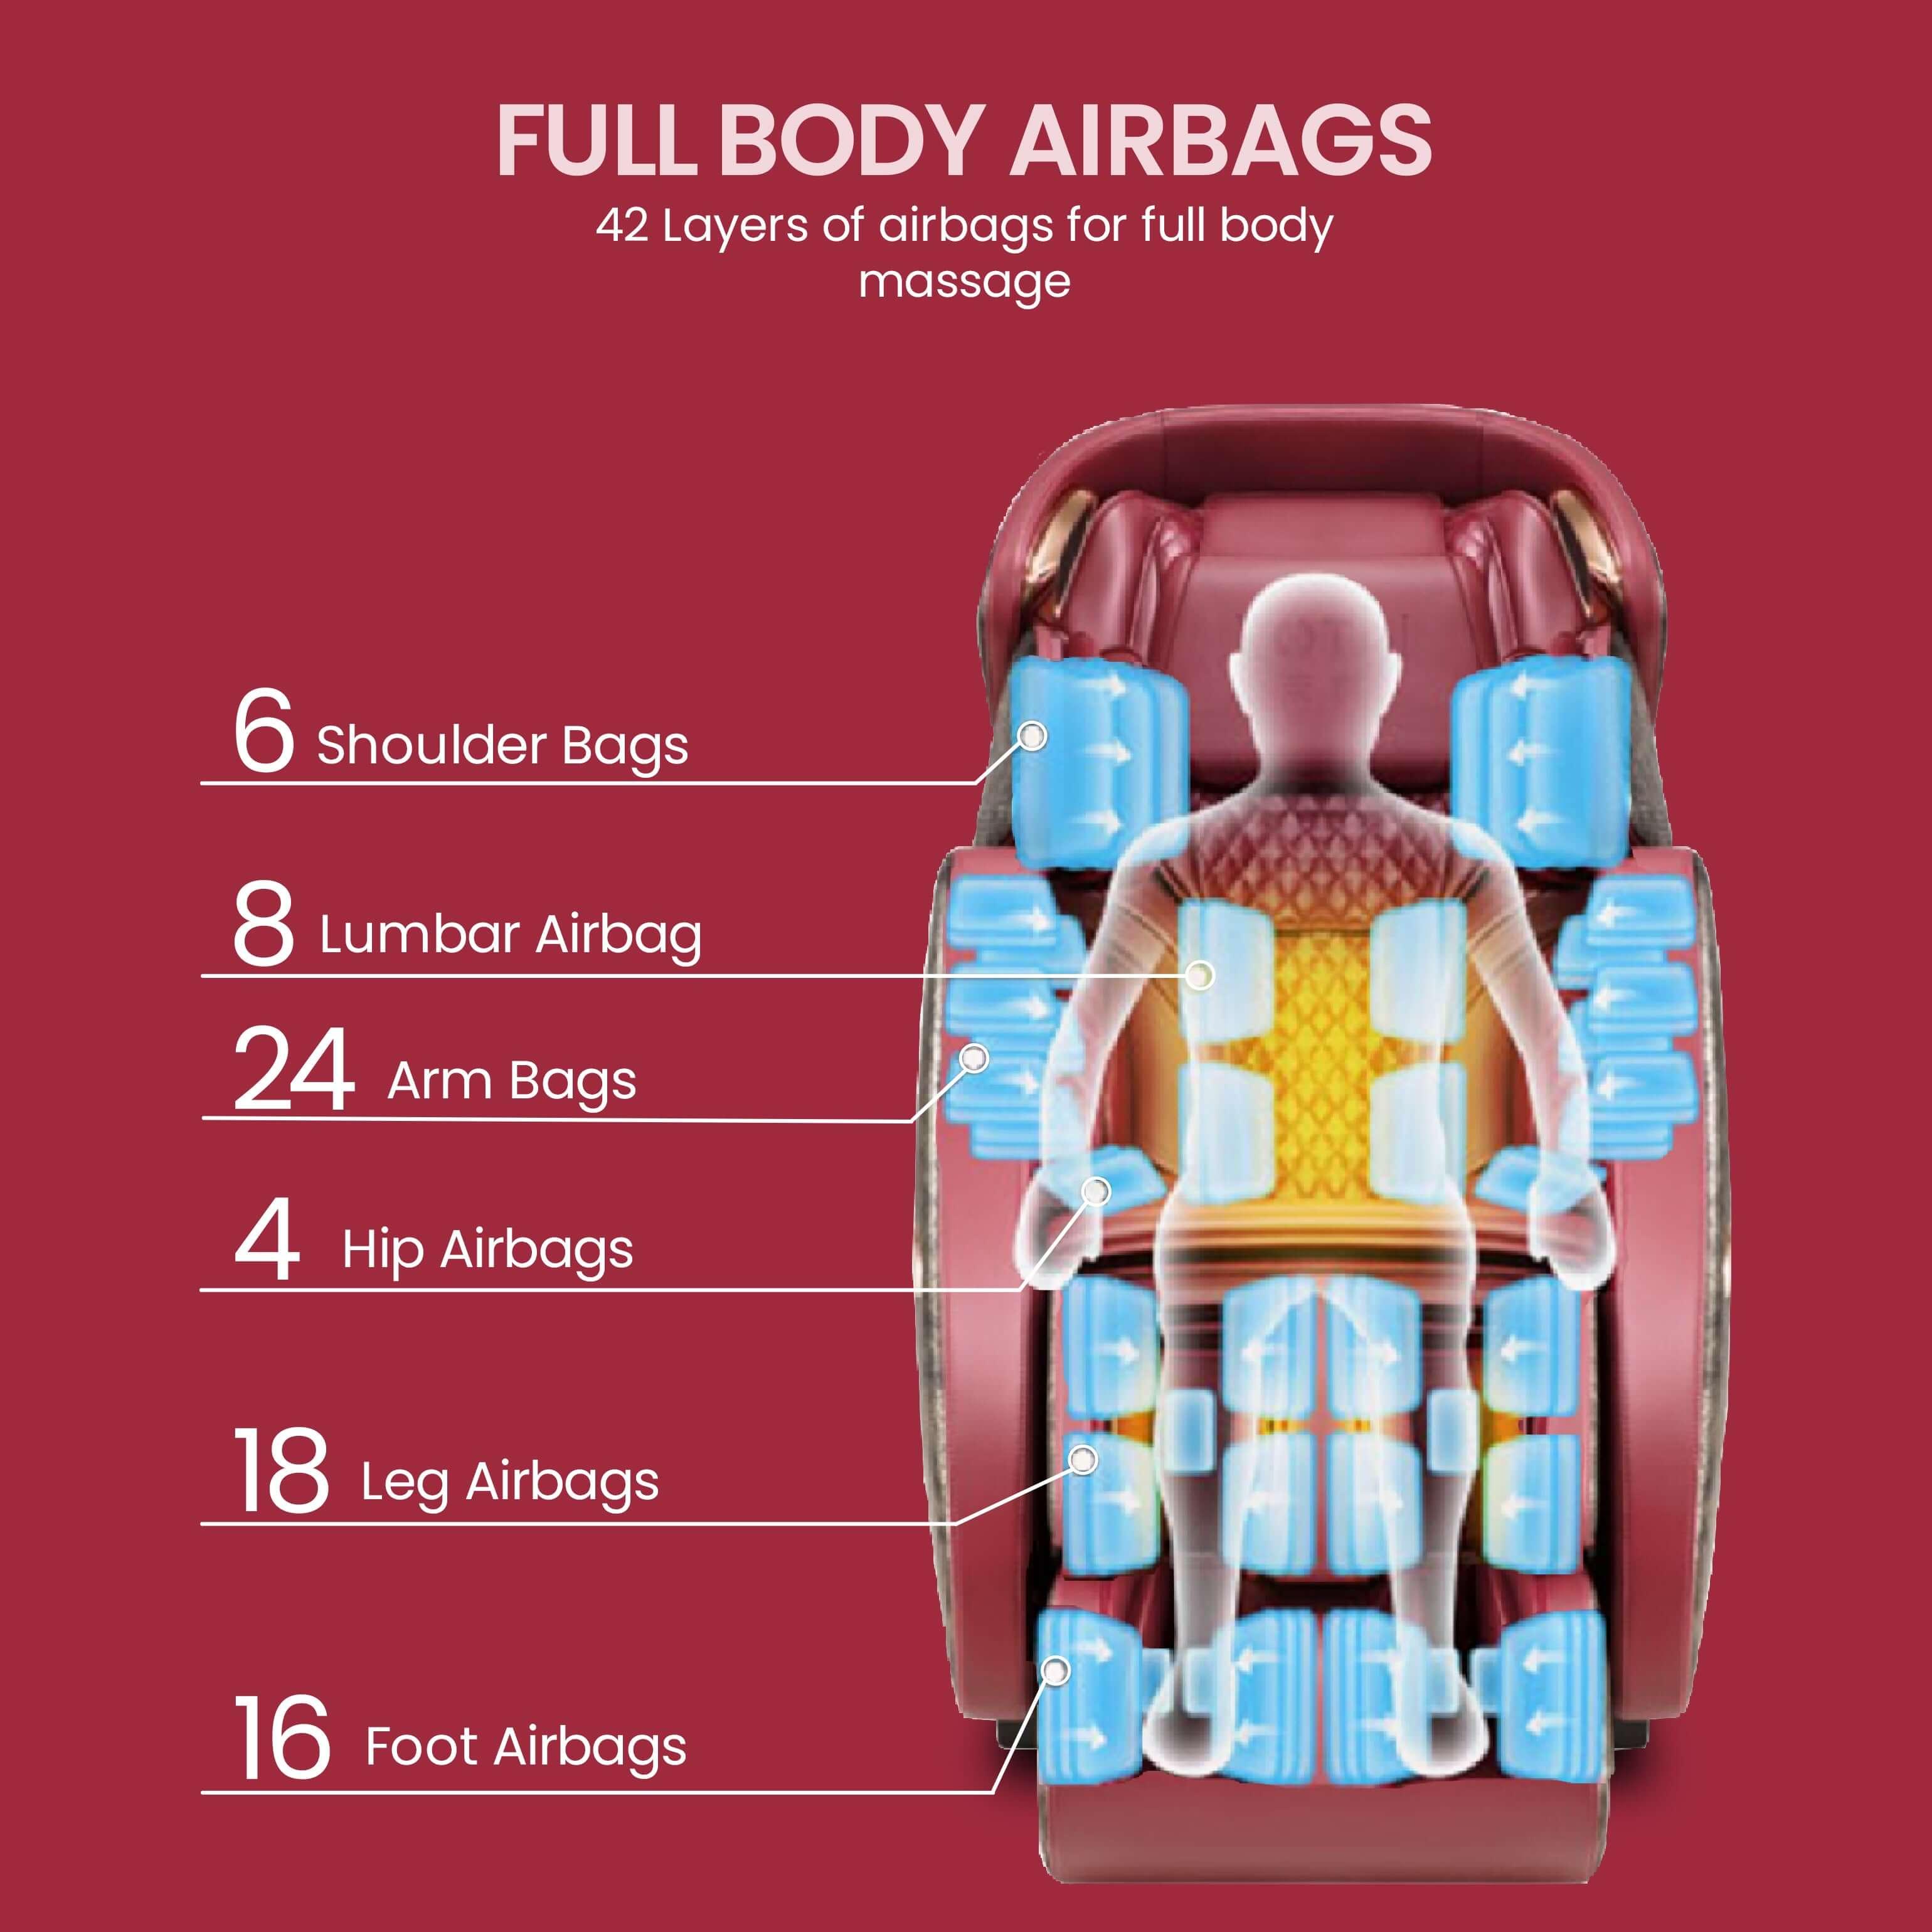 Full body massage chair with 42 airbags, including shoulder, lumbar, arm, hip, leg, and foot airbags for a comprehensive massage experience. best massage chair uae, massage chair Dubai, massage chair uae, massage chair Saudi Arabia, كرسي التدليك, Best mas